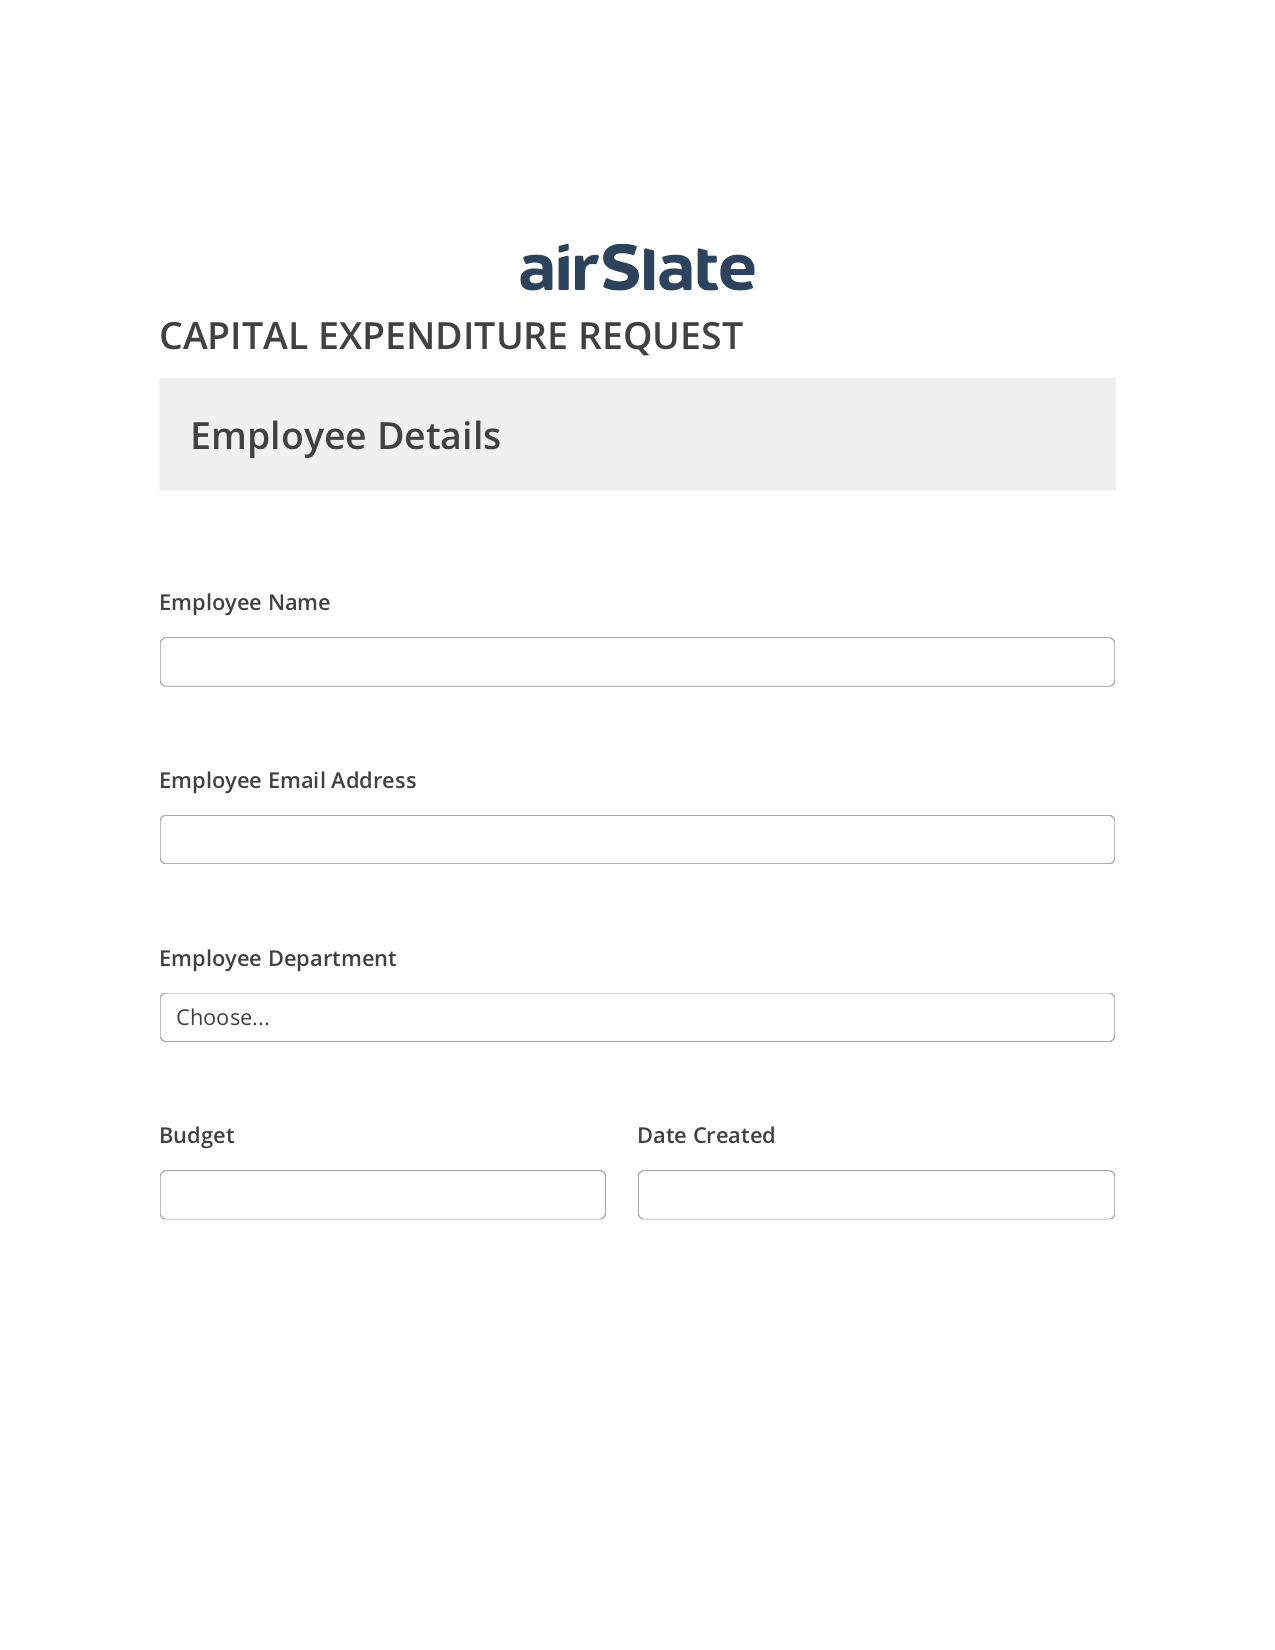 Capital Expenditure Request Approval Workflow System Bot - Slack Two-Way Binding Bot, Create Salesforce Record Bot, Export to Smartsheet